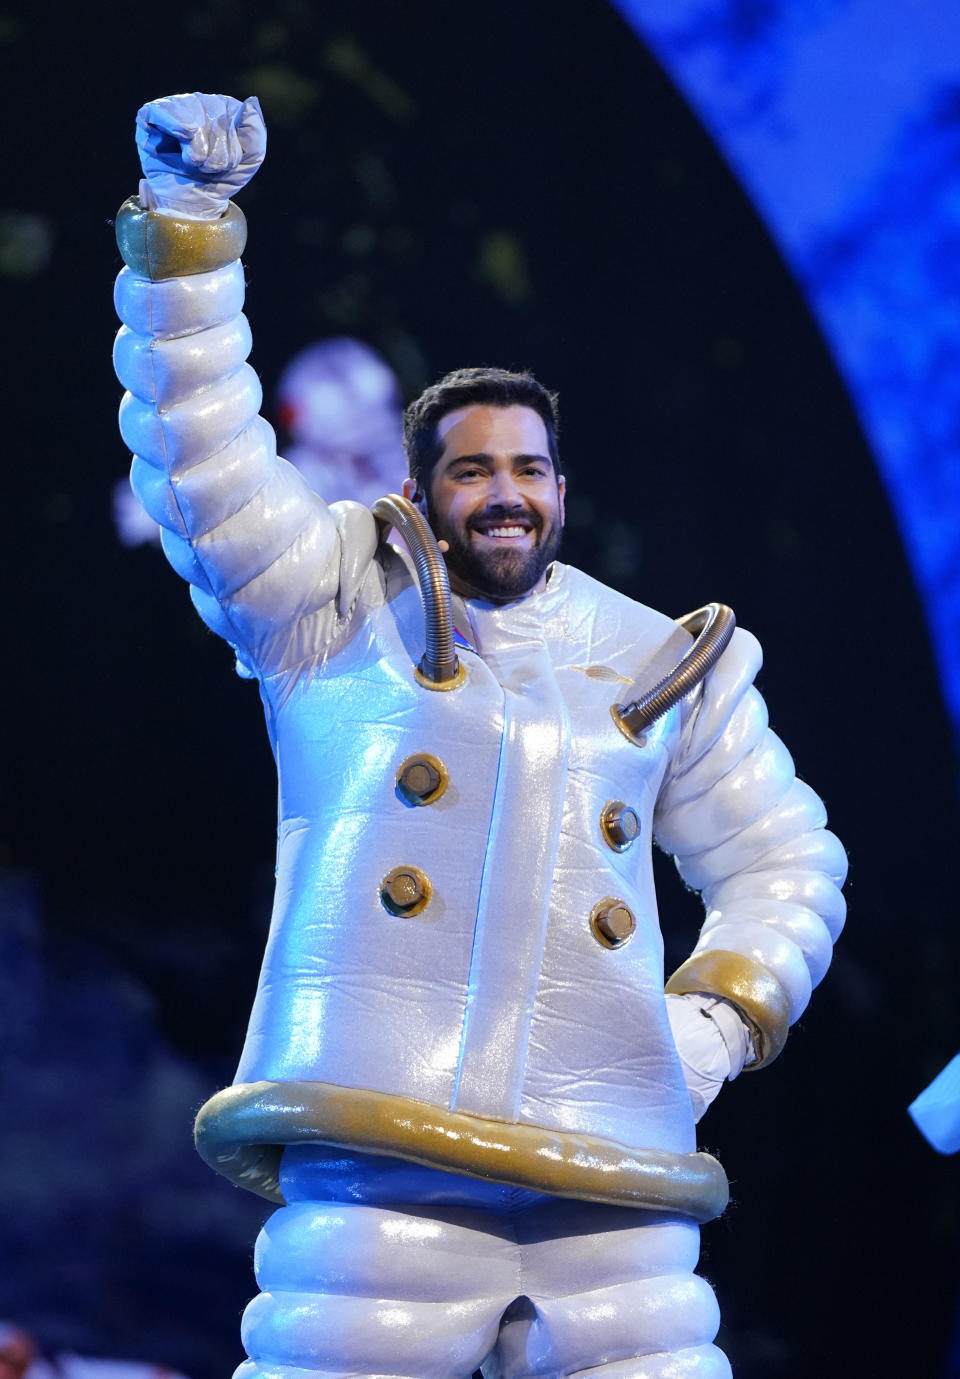 Astronaut was unmasked as Jesse Metcalfe. (ITV)